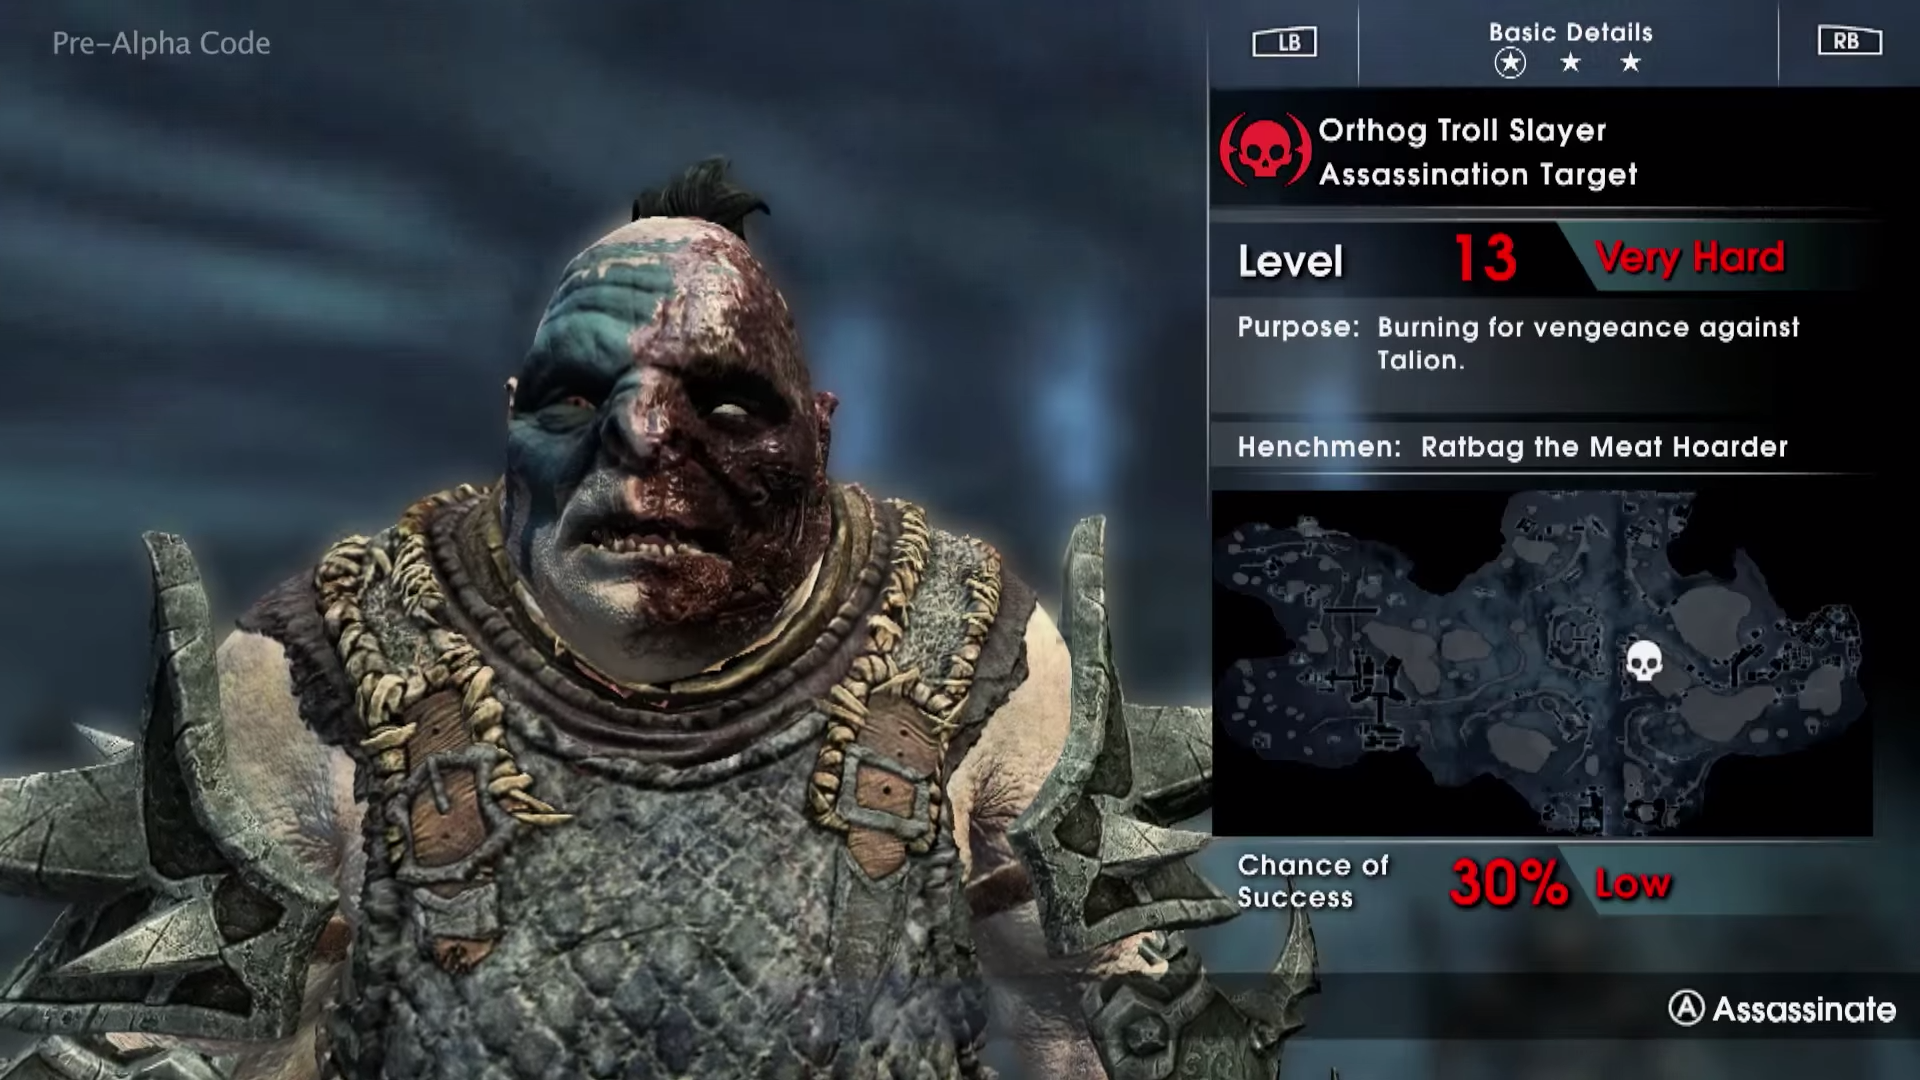 Burning Vengeance - Middle-Earth: Shadow of Mordor Guide - IGN